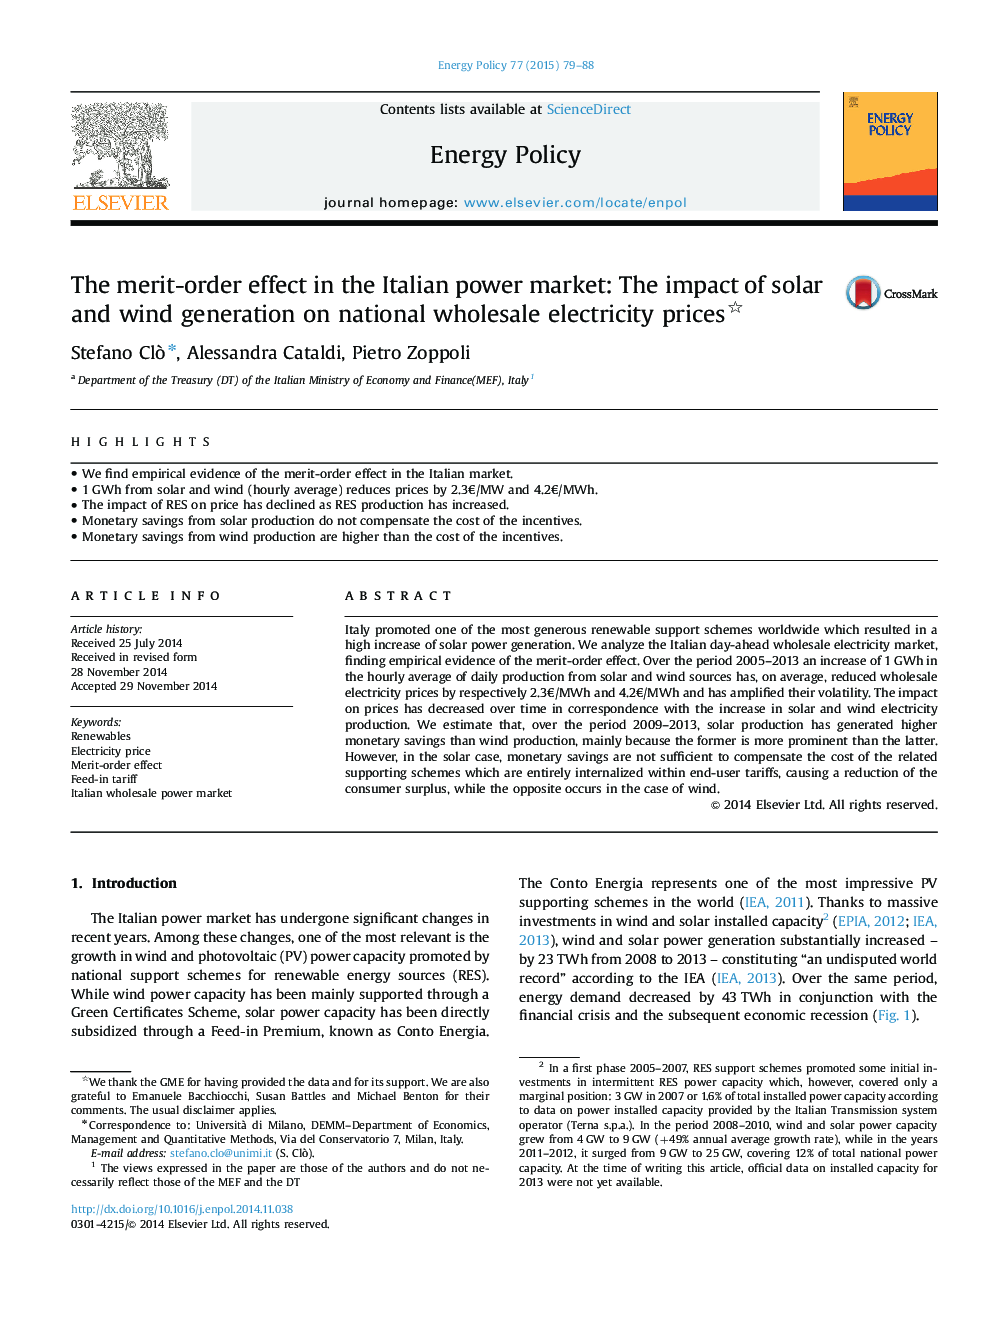 The merit-order effect in the Italian power market: The impact of solar and wind generation on national wholesale electricity prices